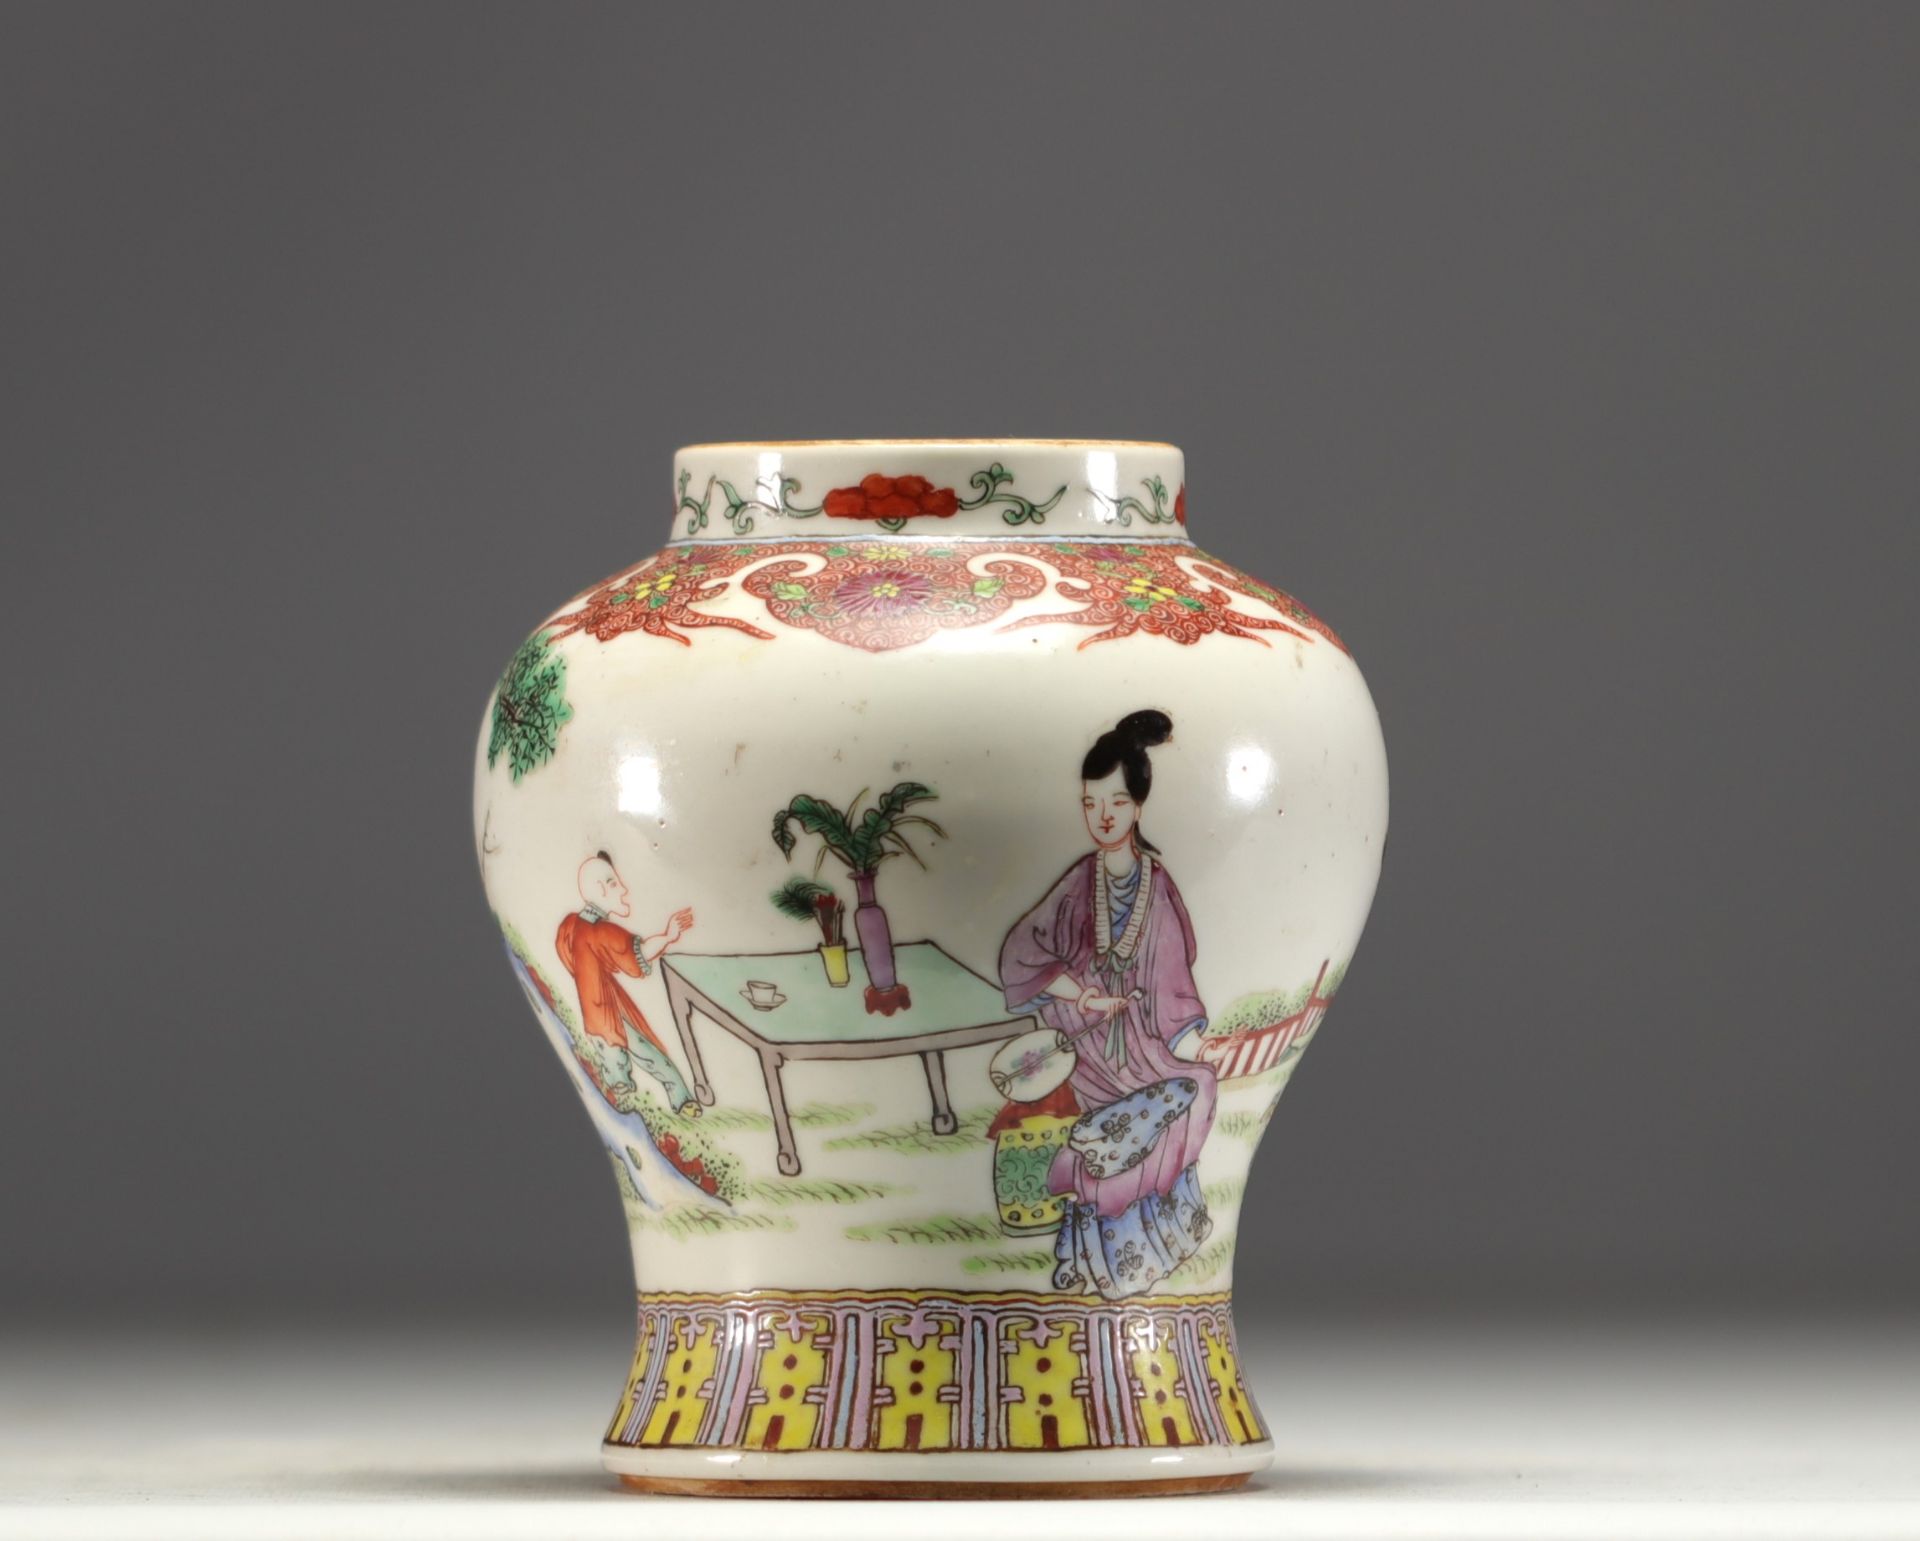 China - Famille rose porcelain vase decorated with women and children. - Image 4 of 4